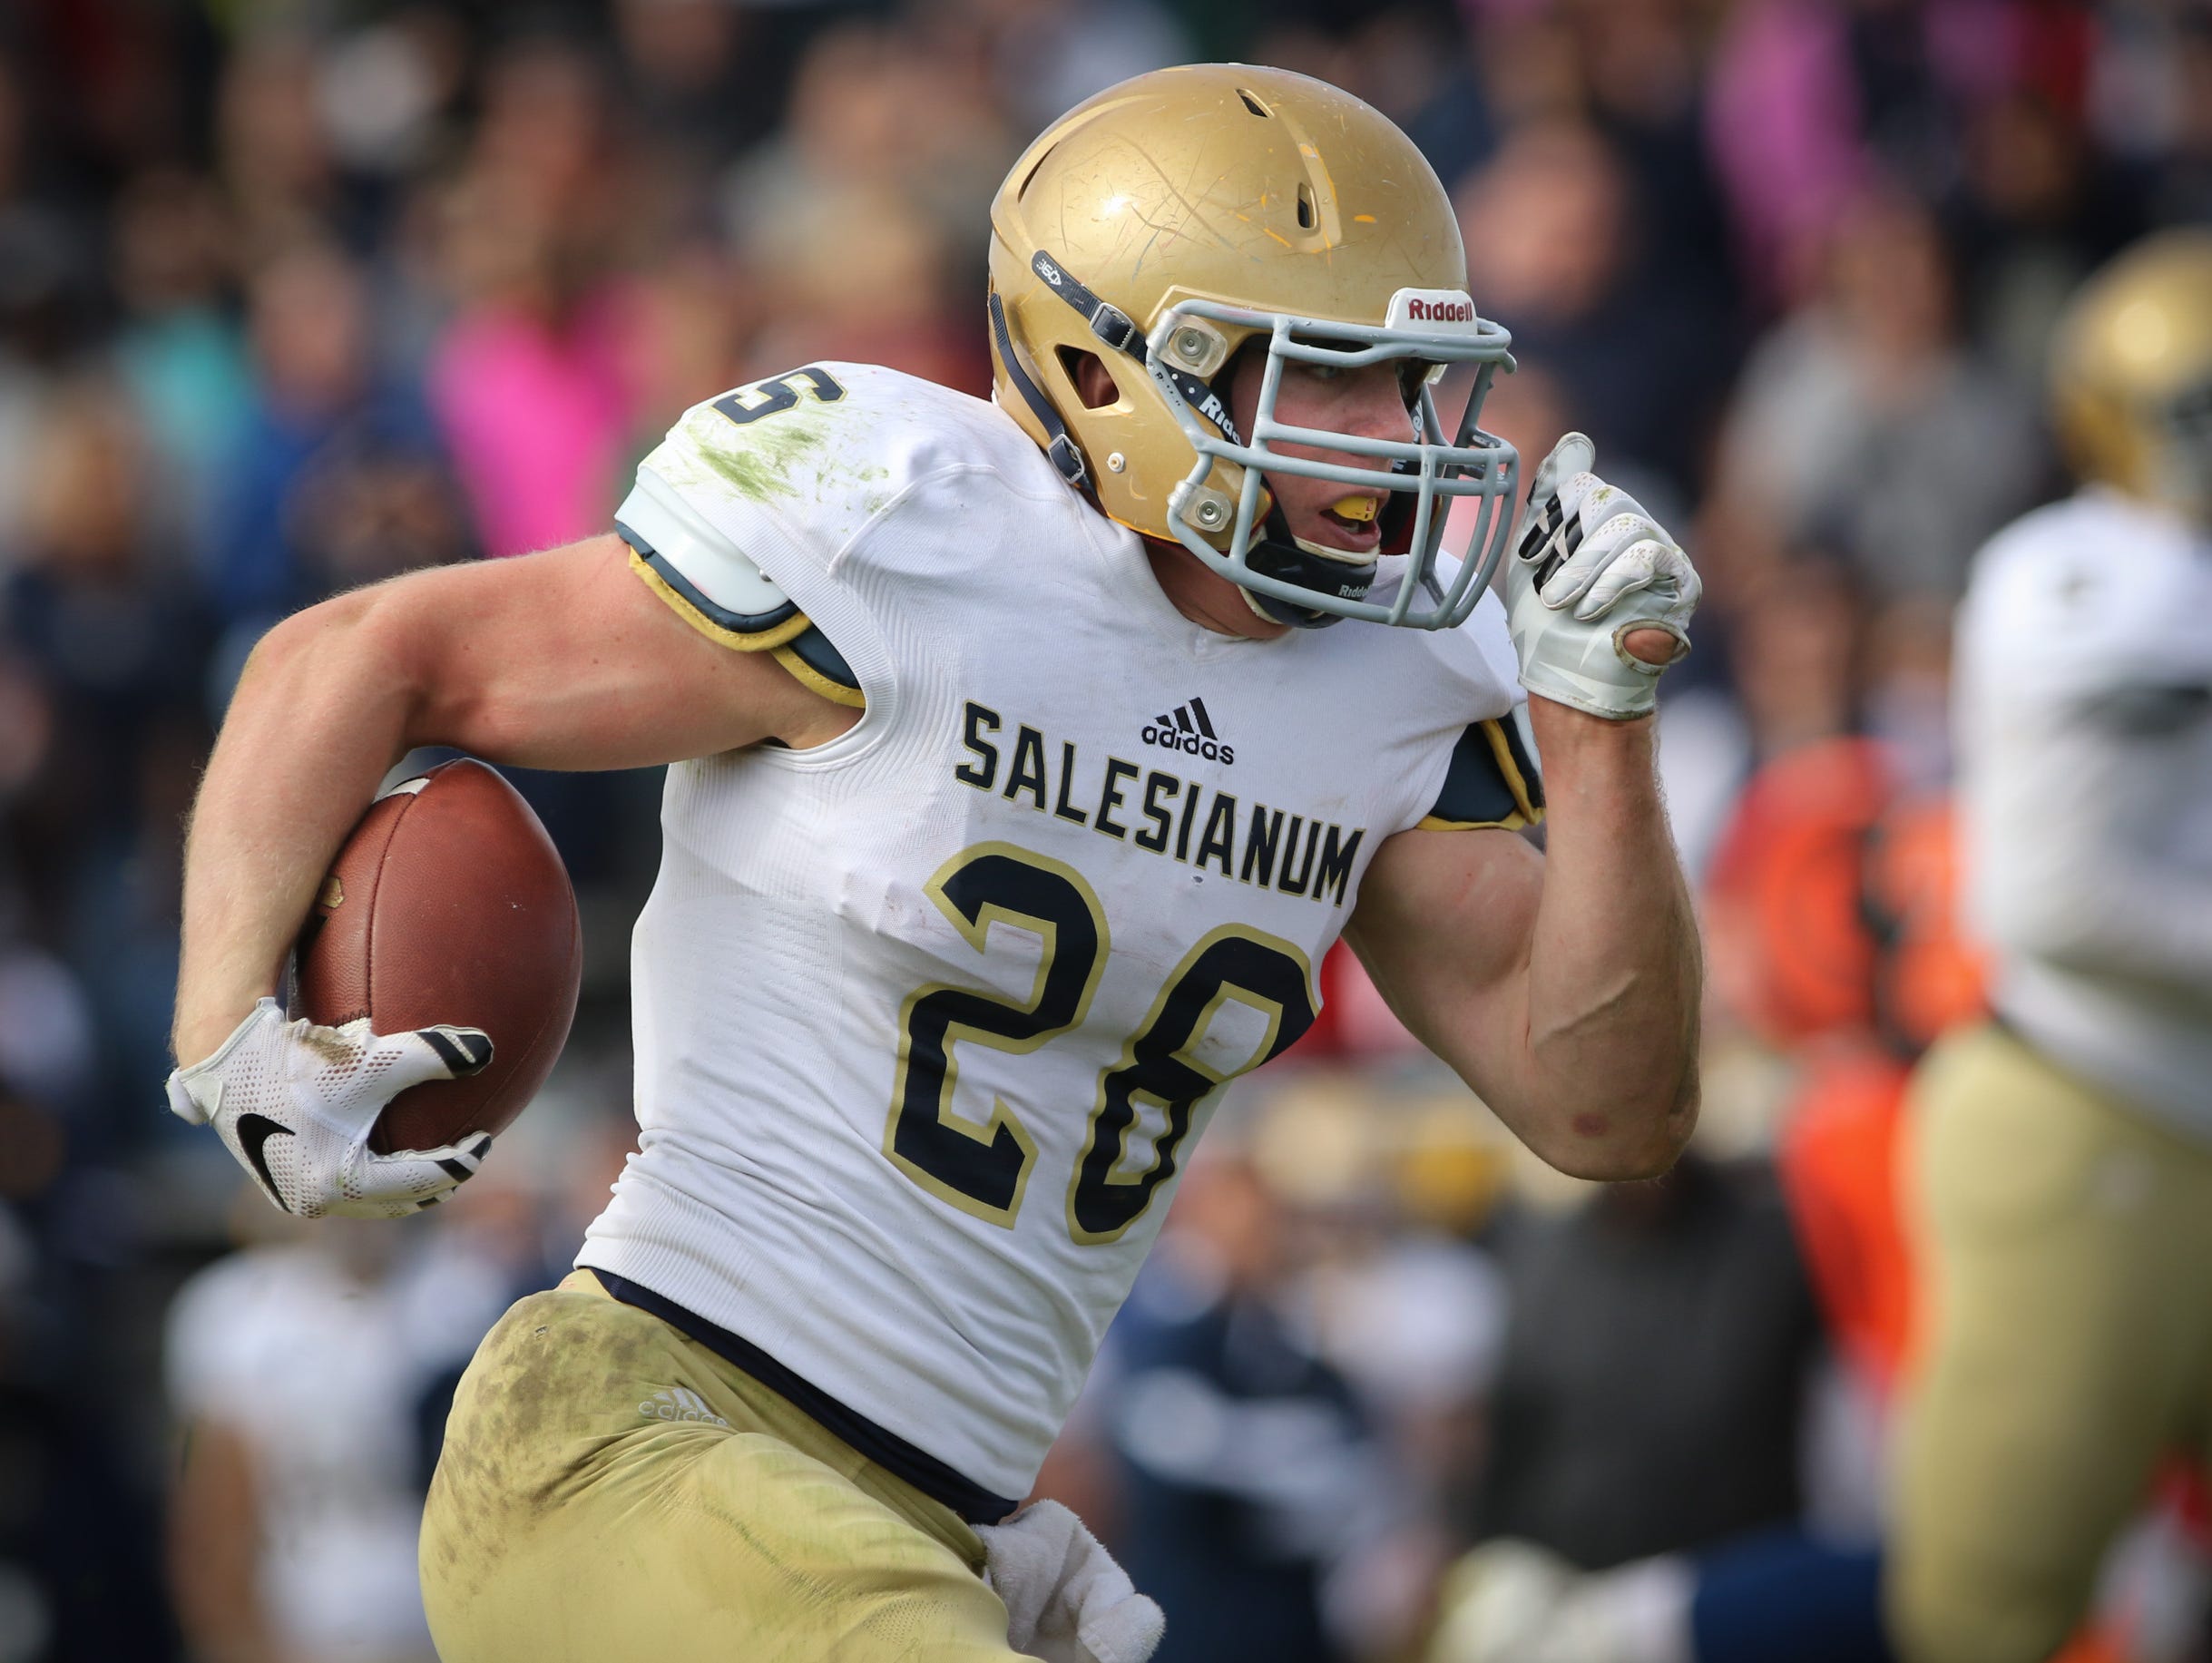 Salesianum running back Colby Reeder rushed for 408 yards against Smyrna in the first meeting.